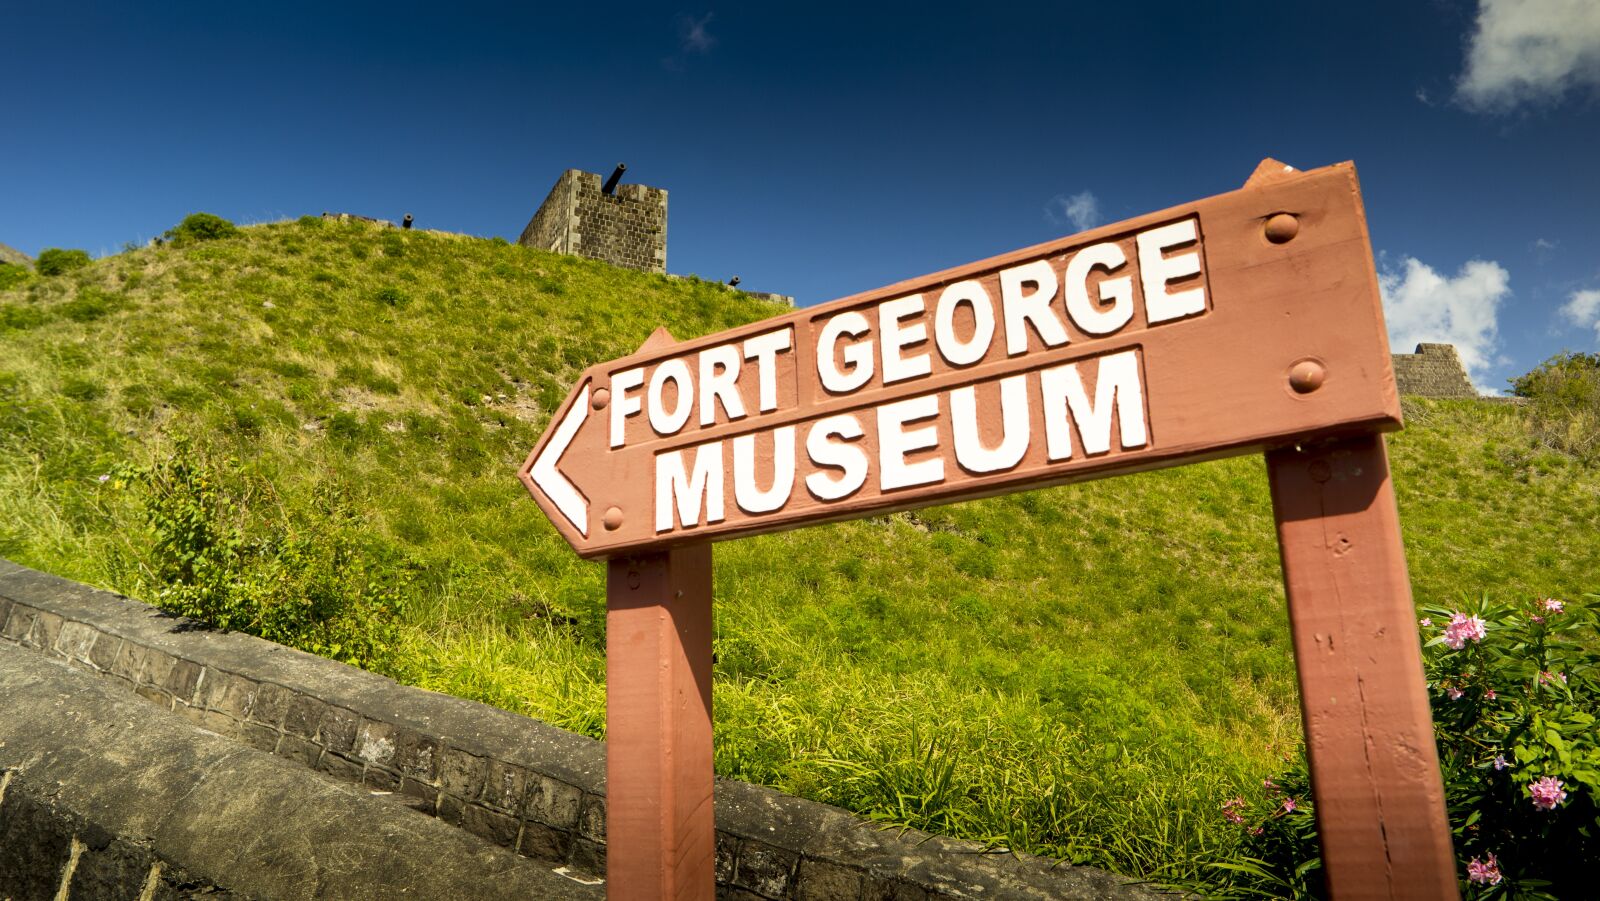 Samsung NX3000 sample photo. Museum, fort george, fortress photography